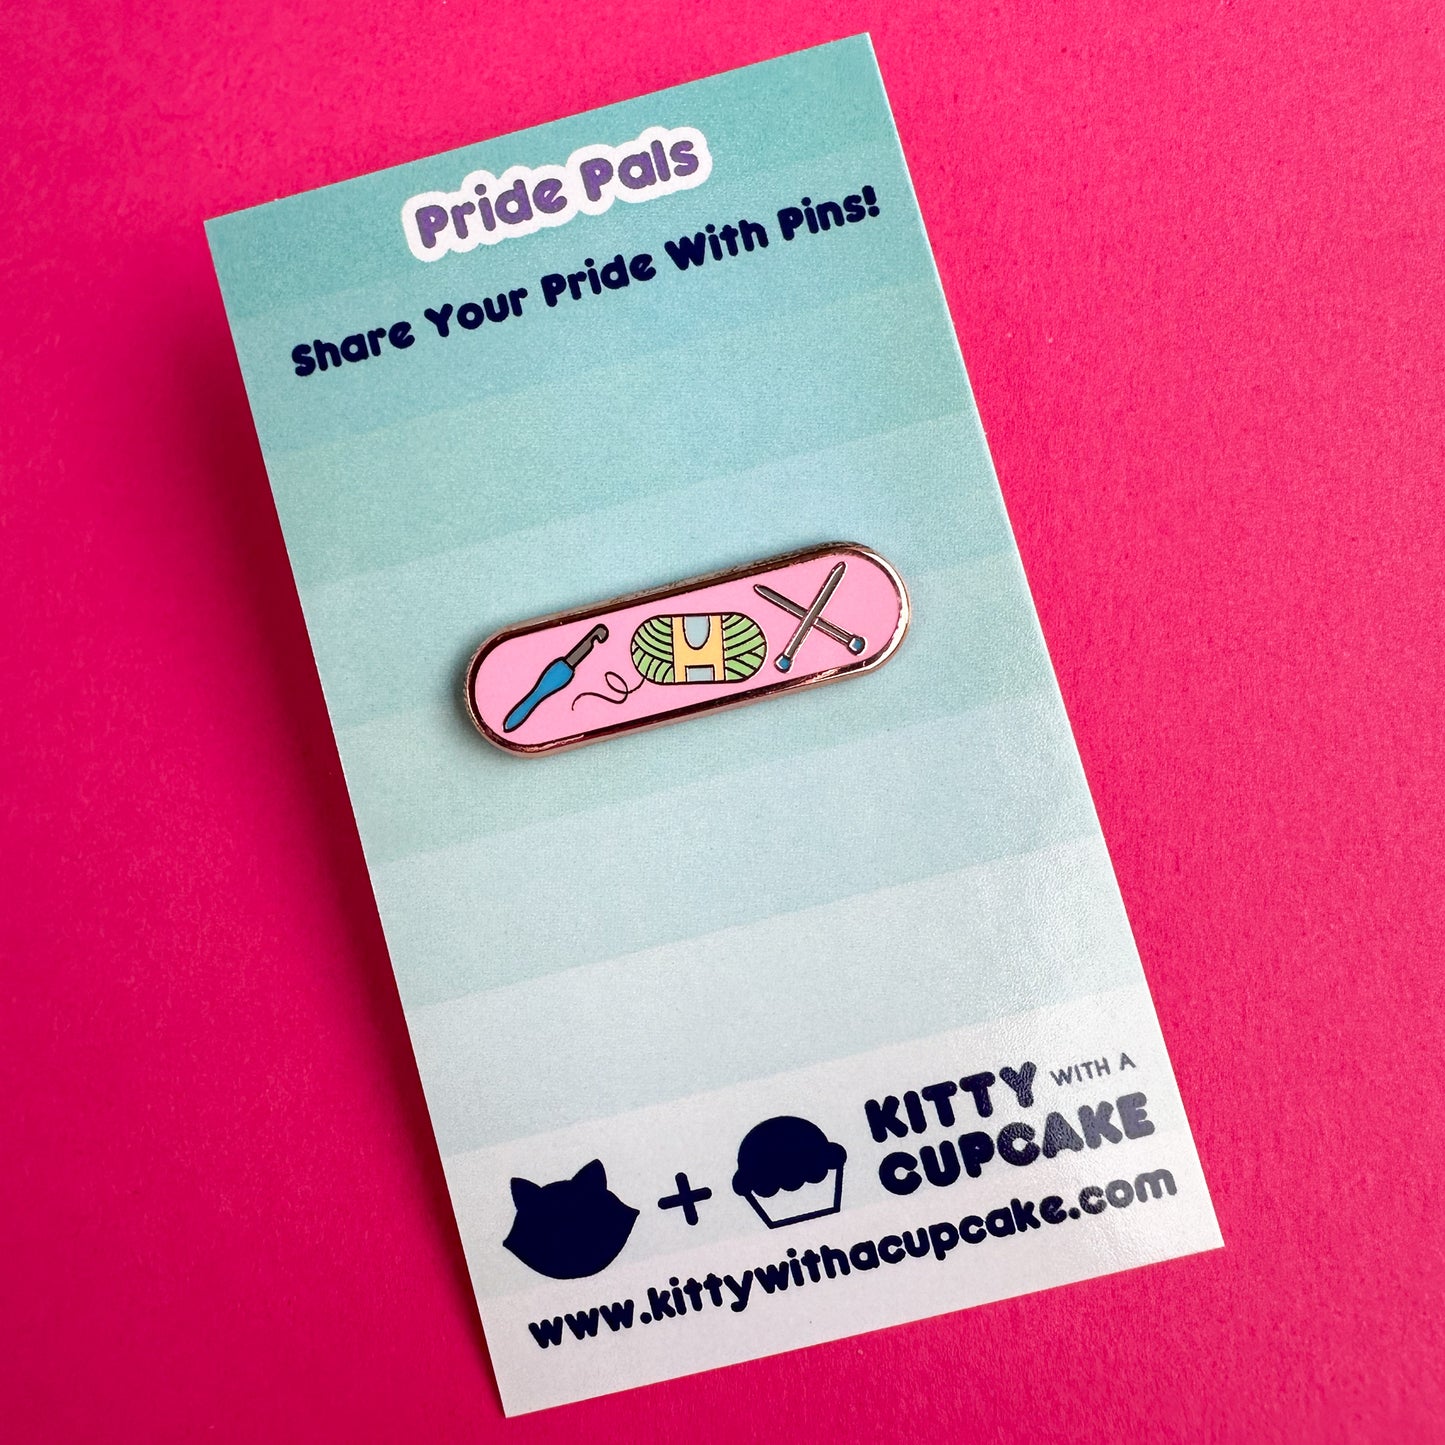 An enamel pin with illustrations of a crochet hook, yarn ball, and knitting needles on it. The pin is packaged on a card and the card is sitting on a hot pink background. 